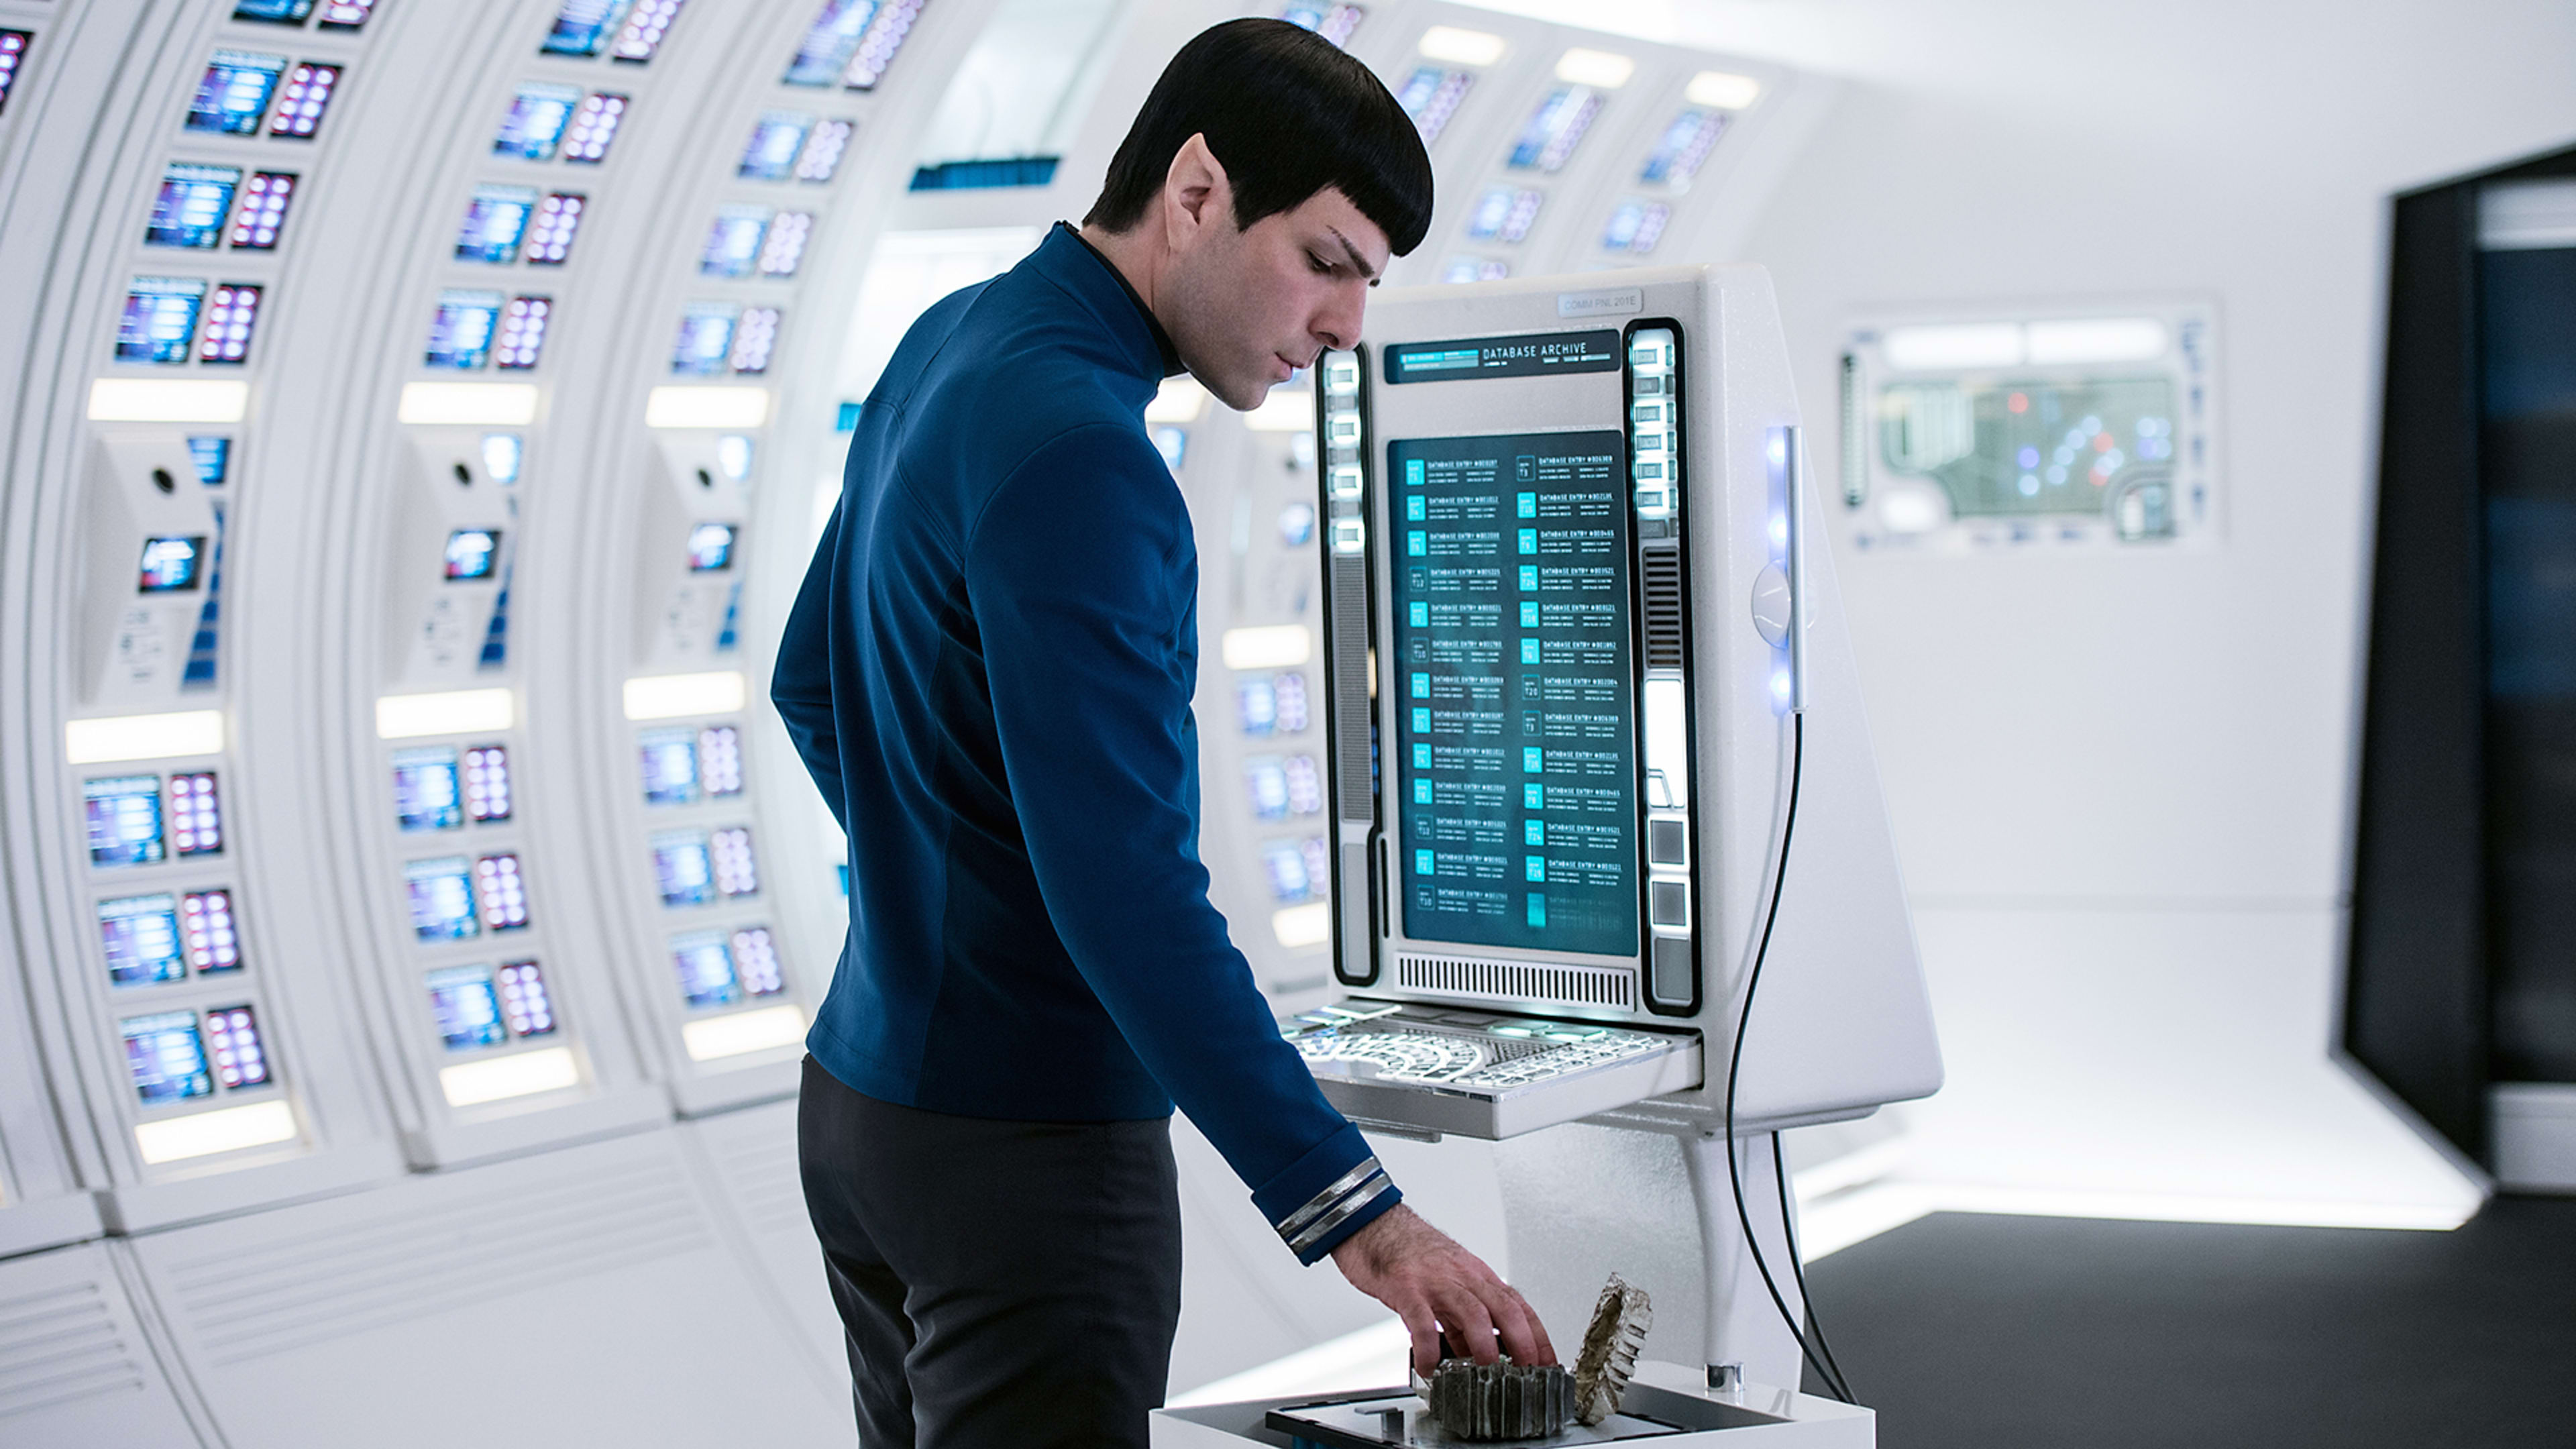 More “Star Trek” Tech In Real Life: The Qualcomm Tricorder XPrize